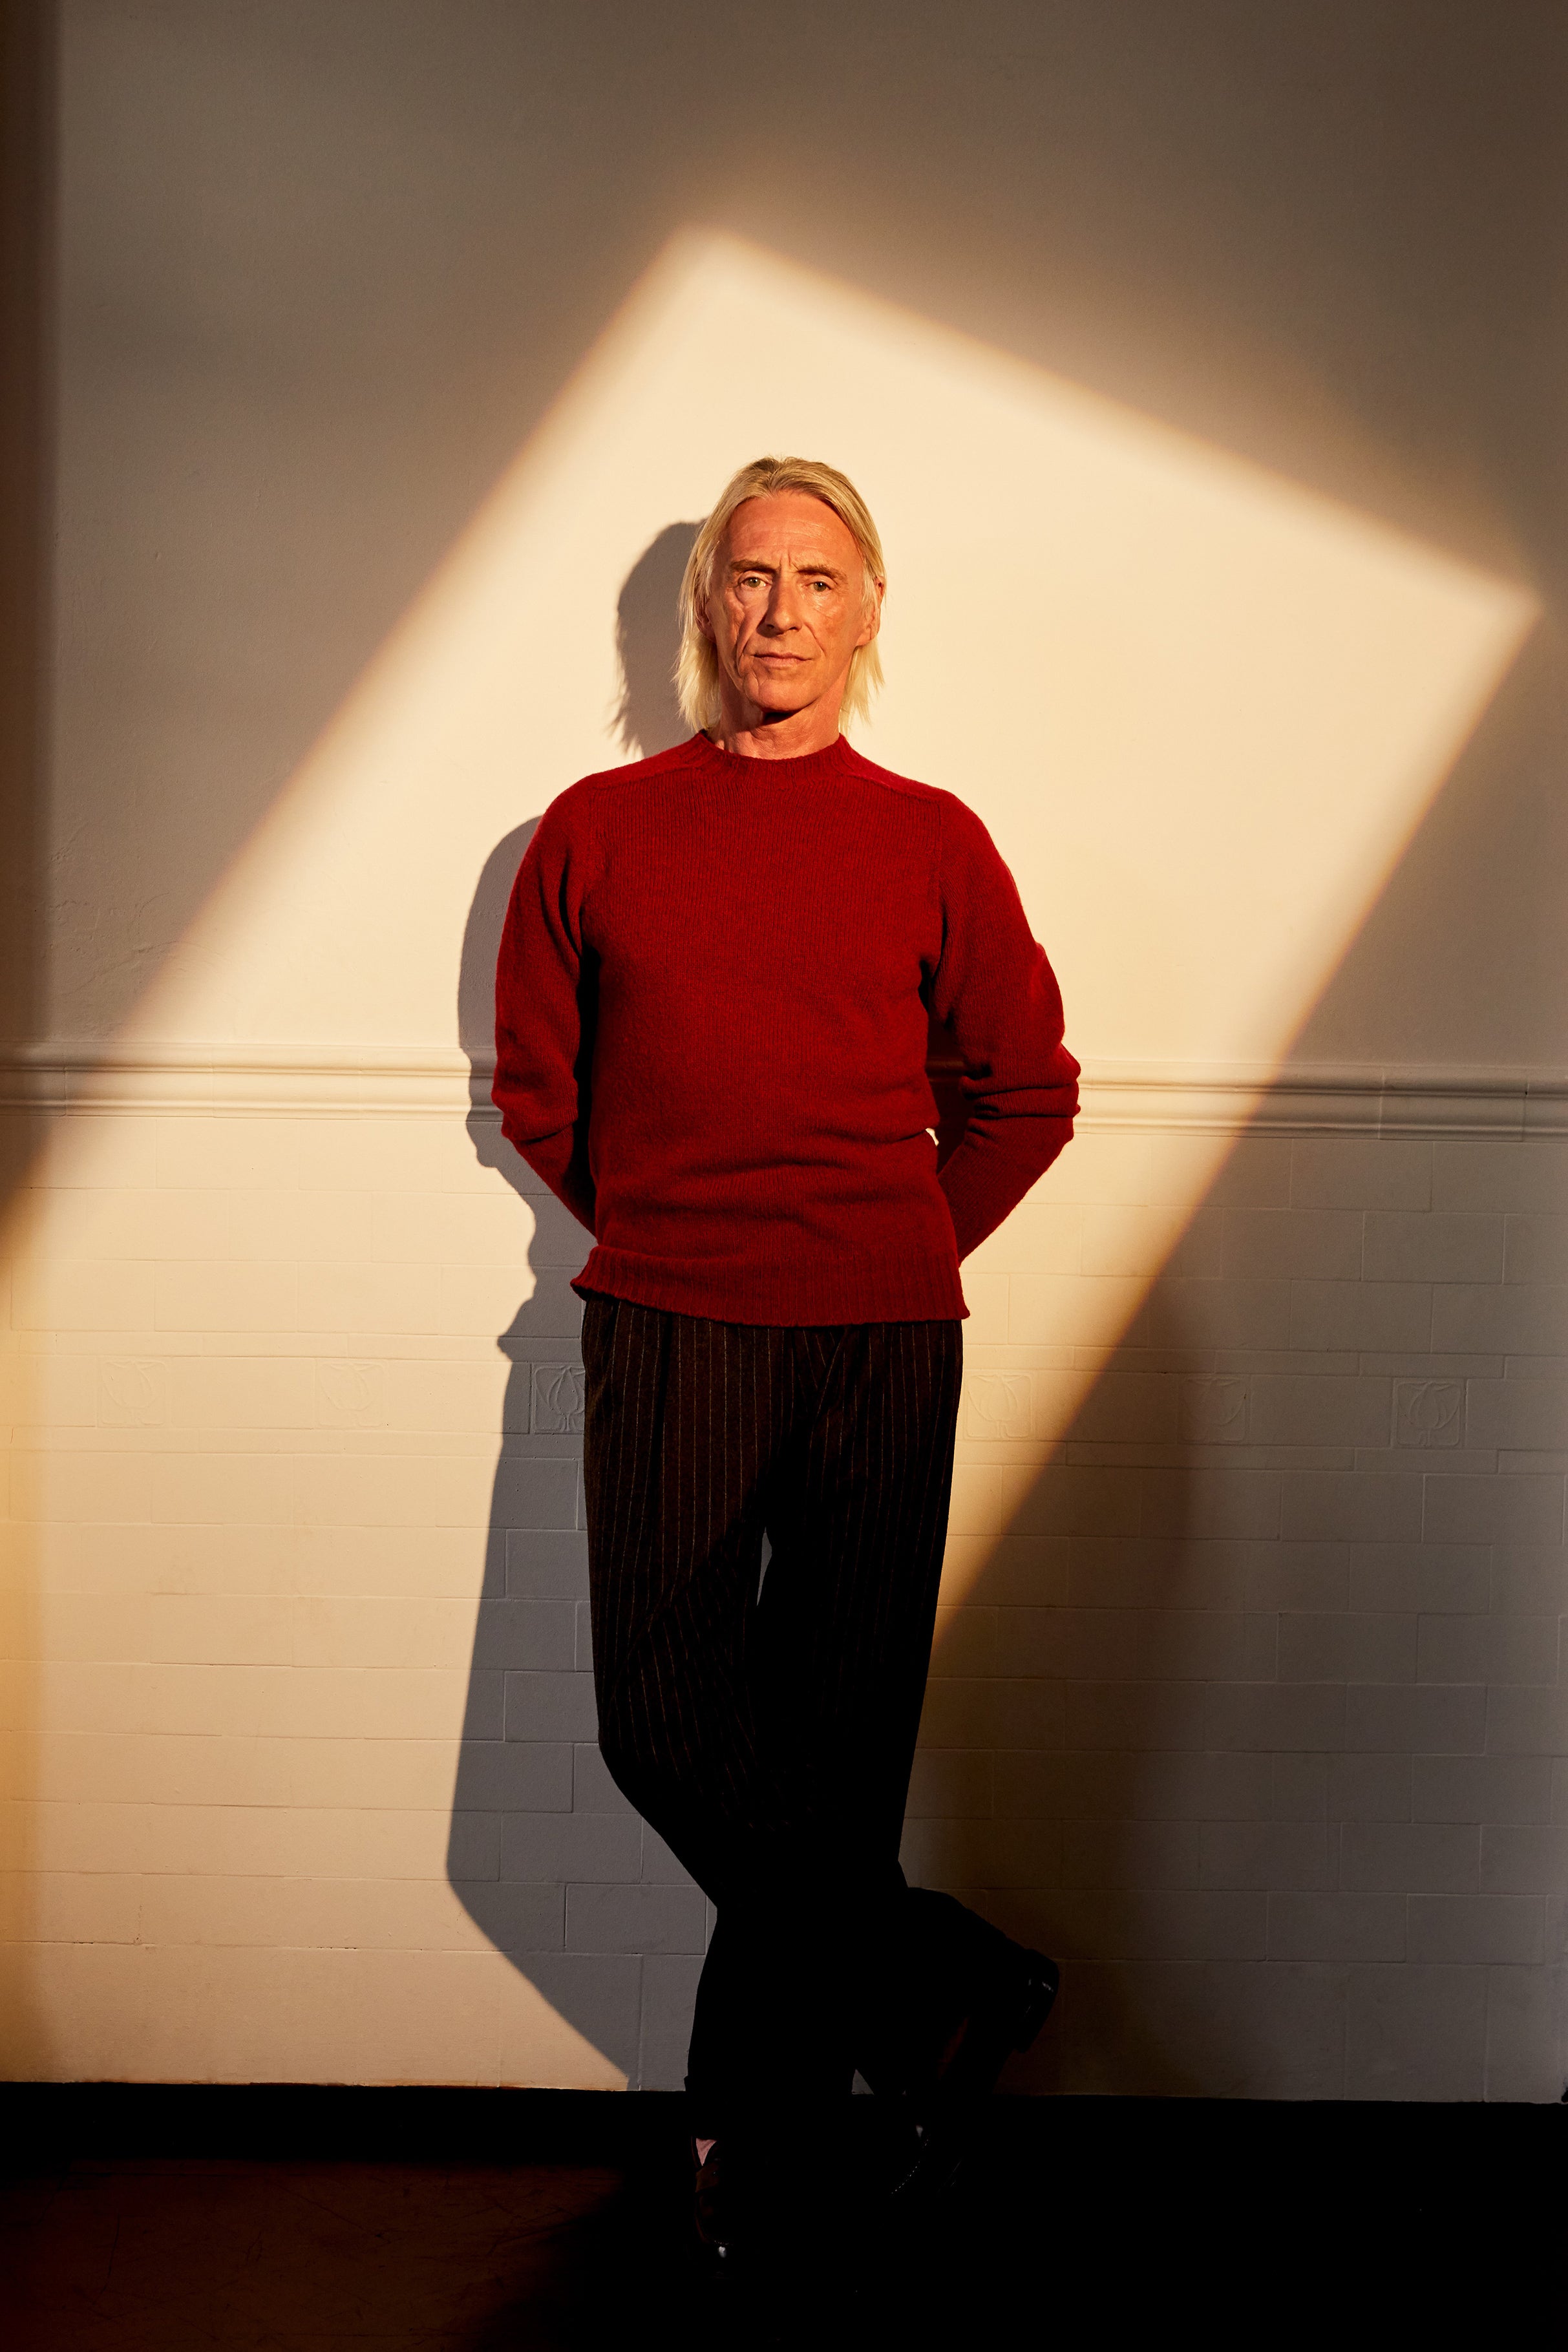 members only presale password for Paul Weller face value tickets in El Cajon at The Magnolia